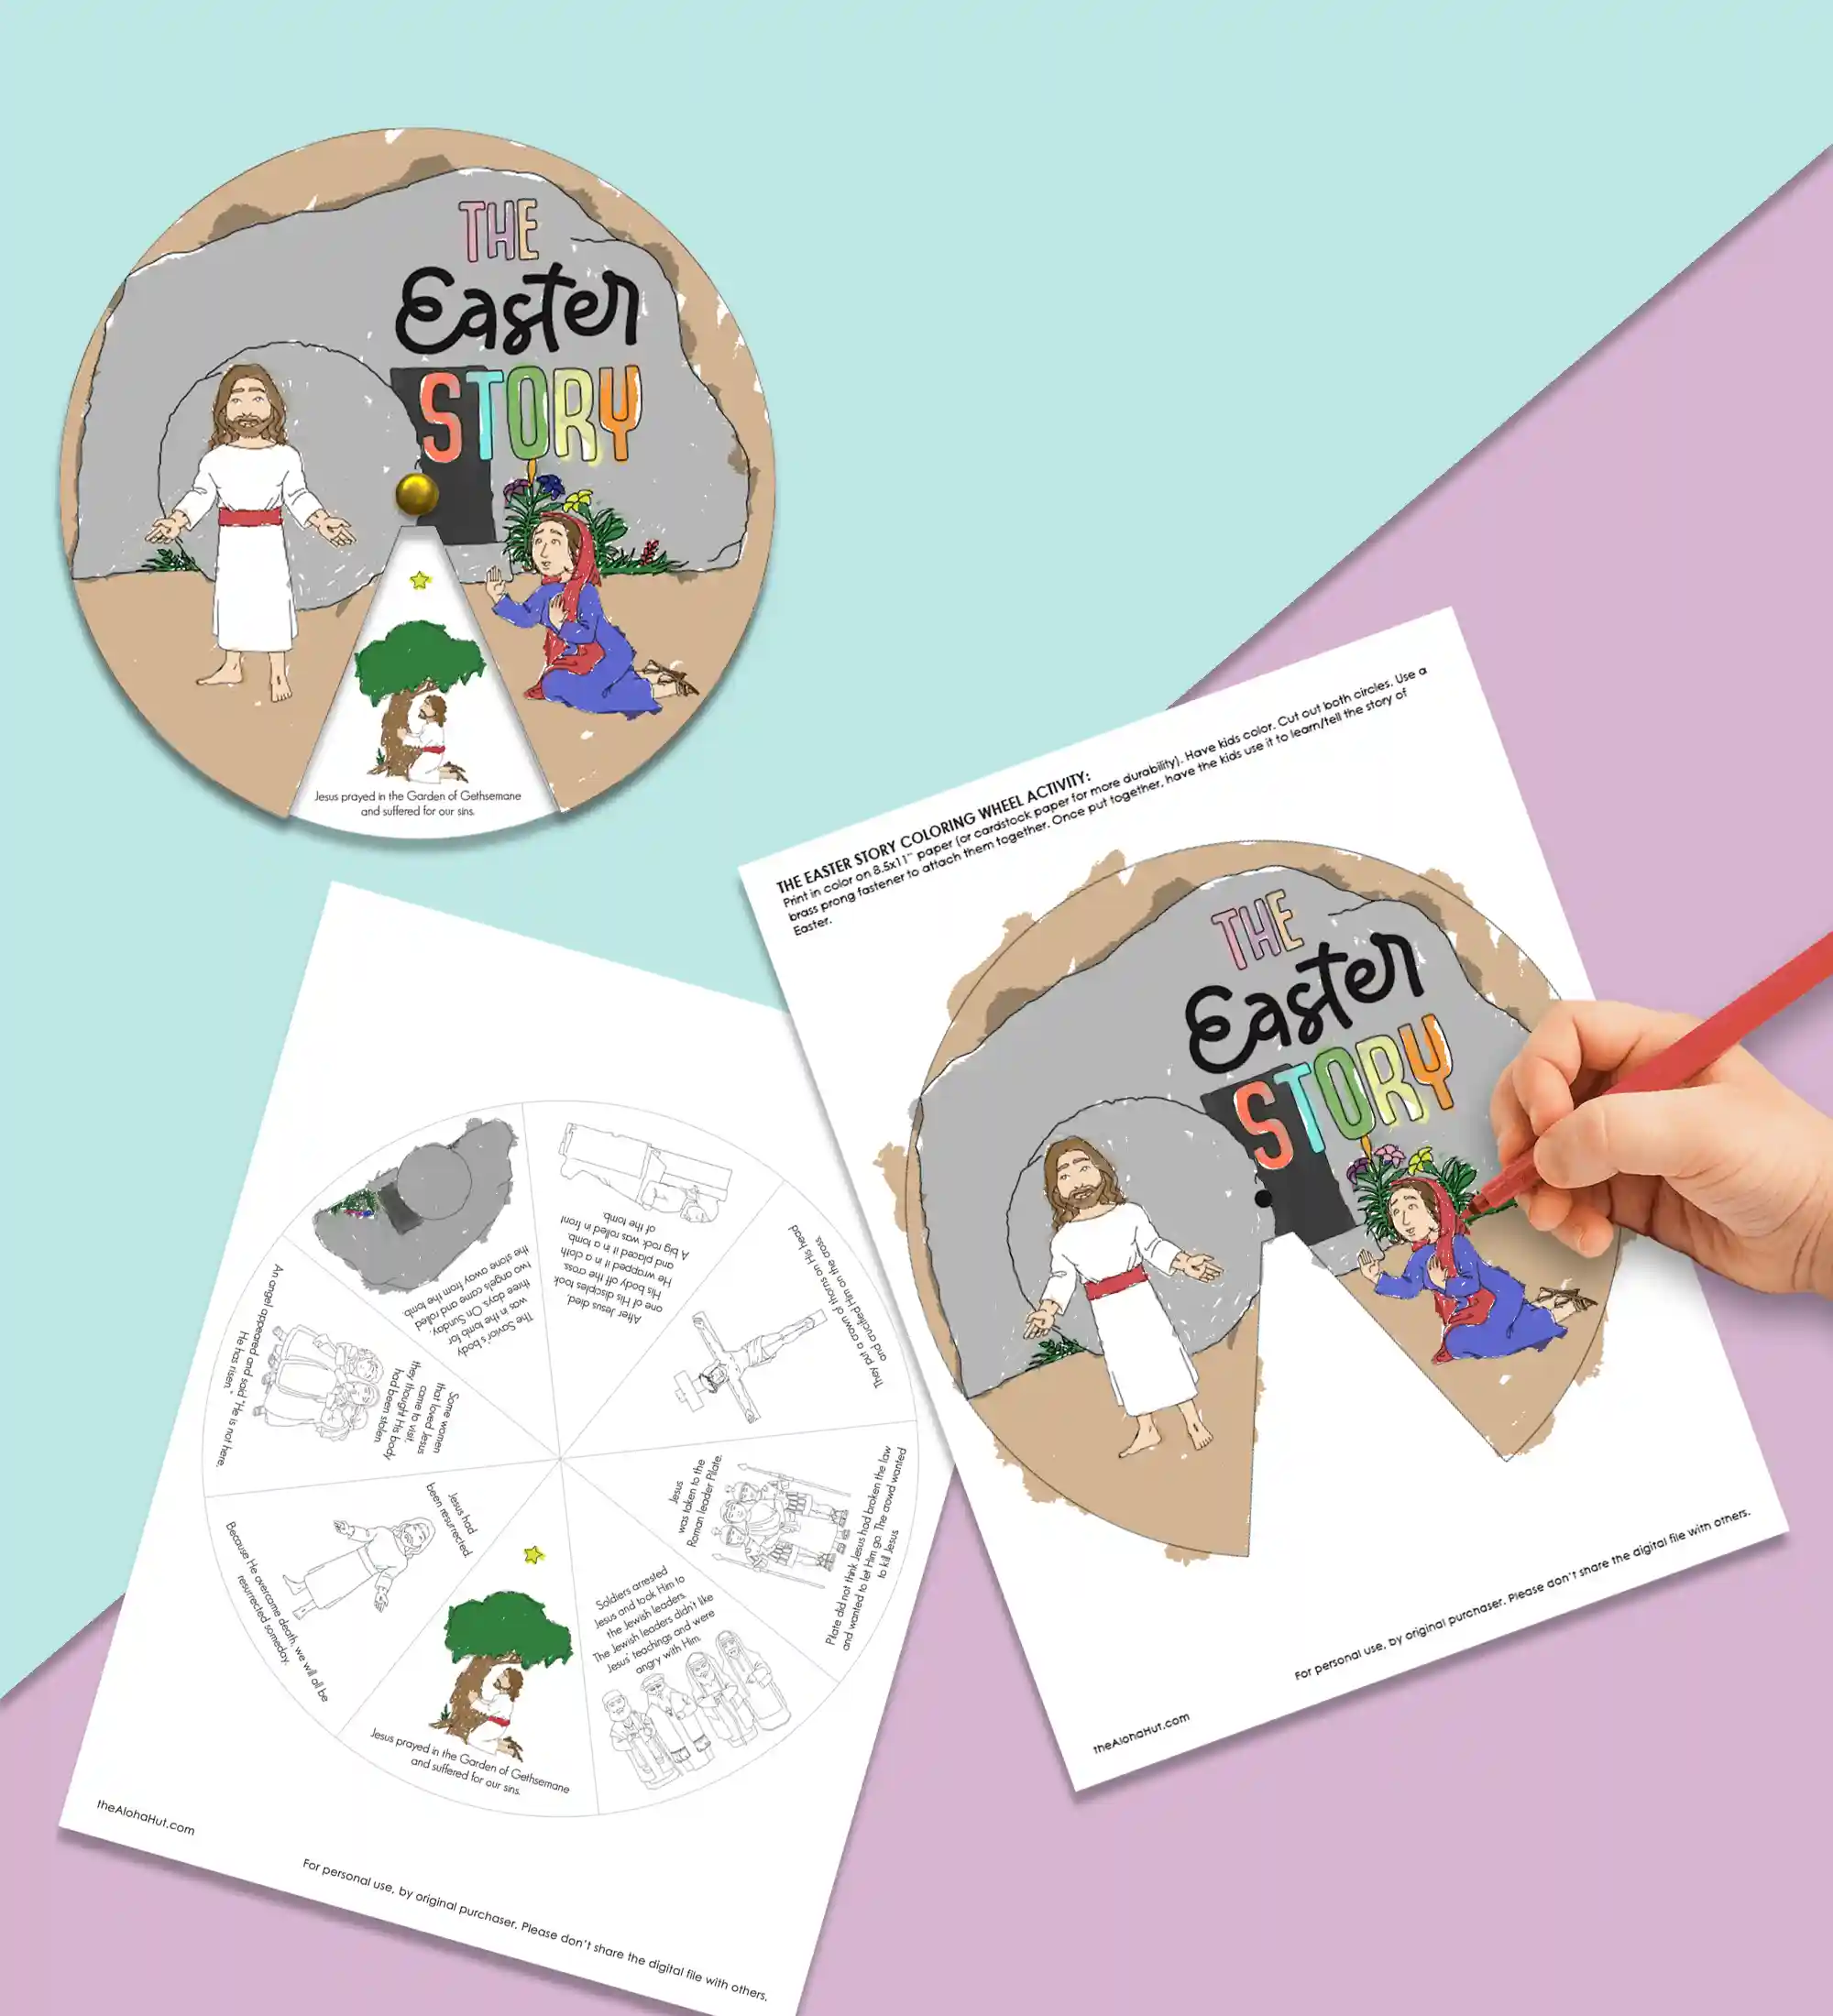 Help kids learn the Easter story with this fun kids Easter coloring activity wheel. The kids can color the Easter Story wheel, cut it out, assemble, and then use it to learn about the death and resurrection of Jesus Christ. Great for home or for primary and church.